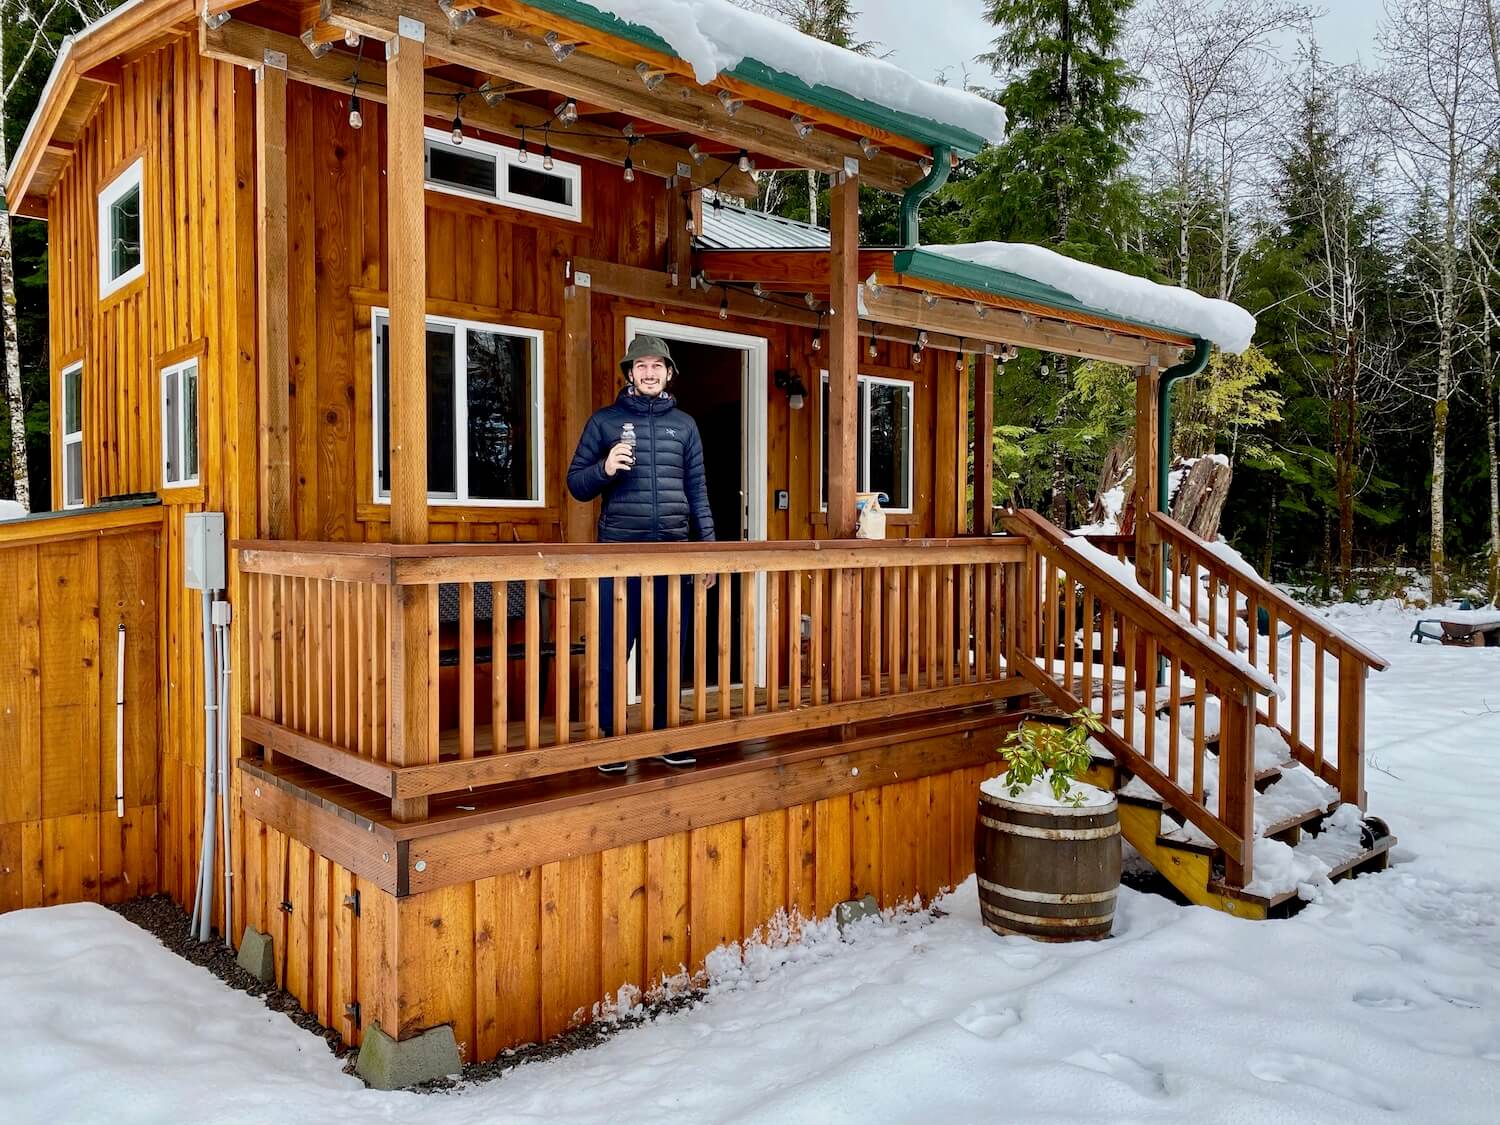 The exterior of a tiny house with Konstantin sipping coffee on the front porch. The cabin has six inches of snow on the roof lines and wet pine siding in a western style.